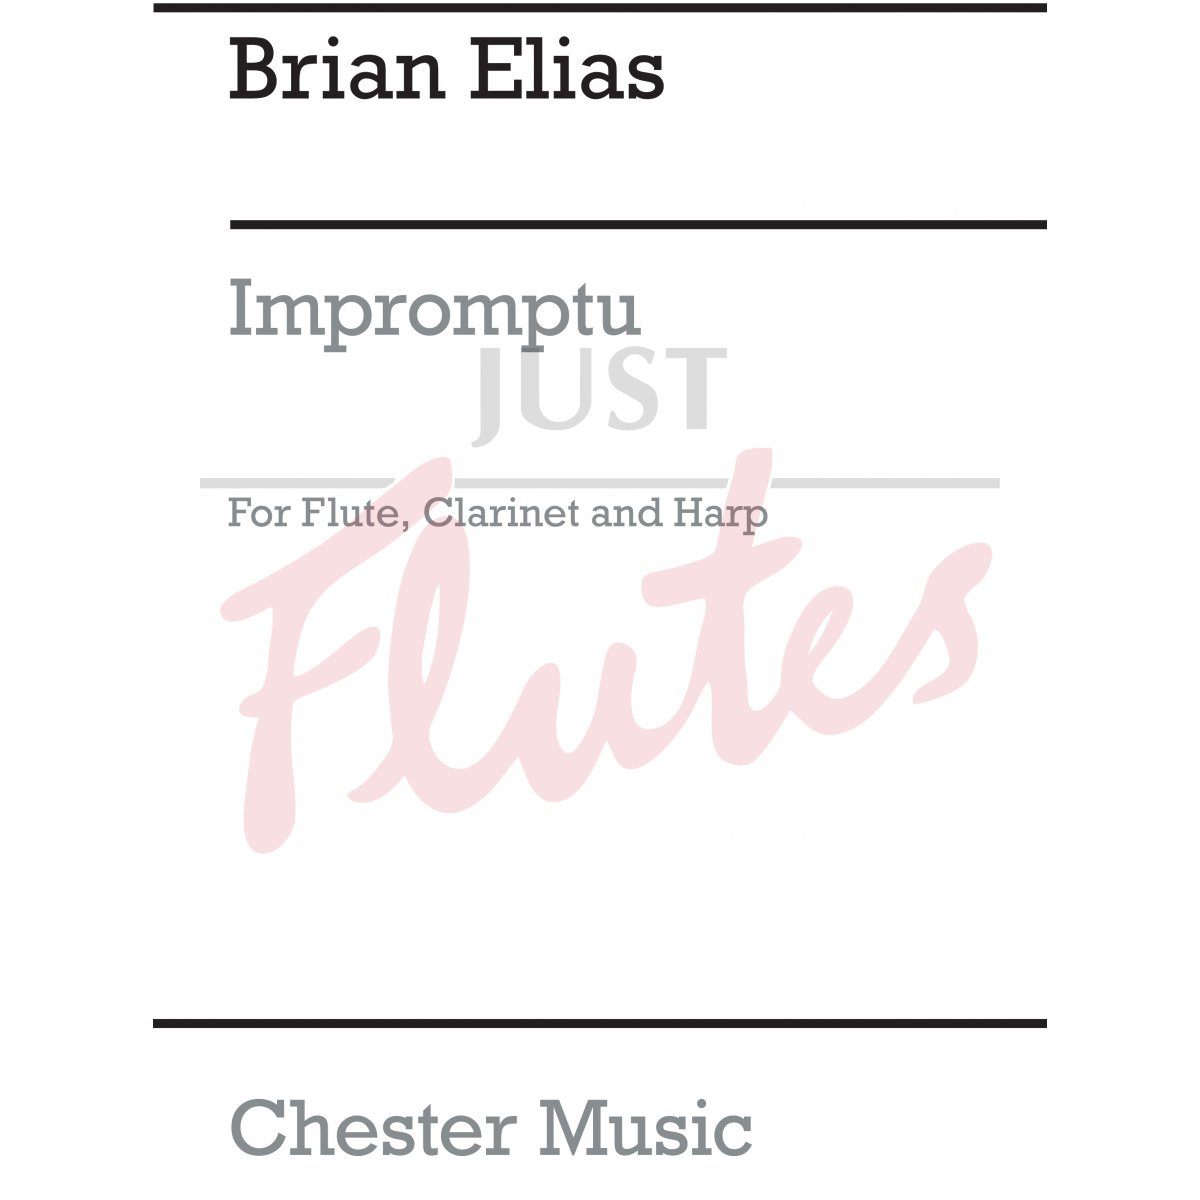 Impromptu for Flute, Clarinet and Harp